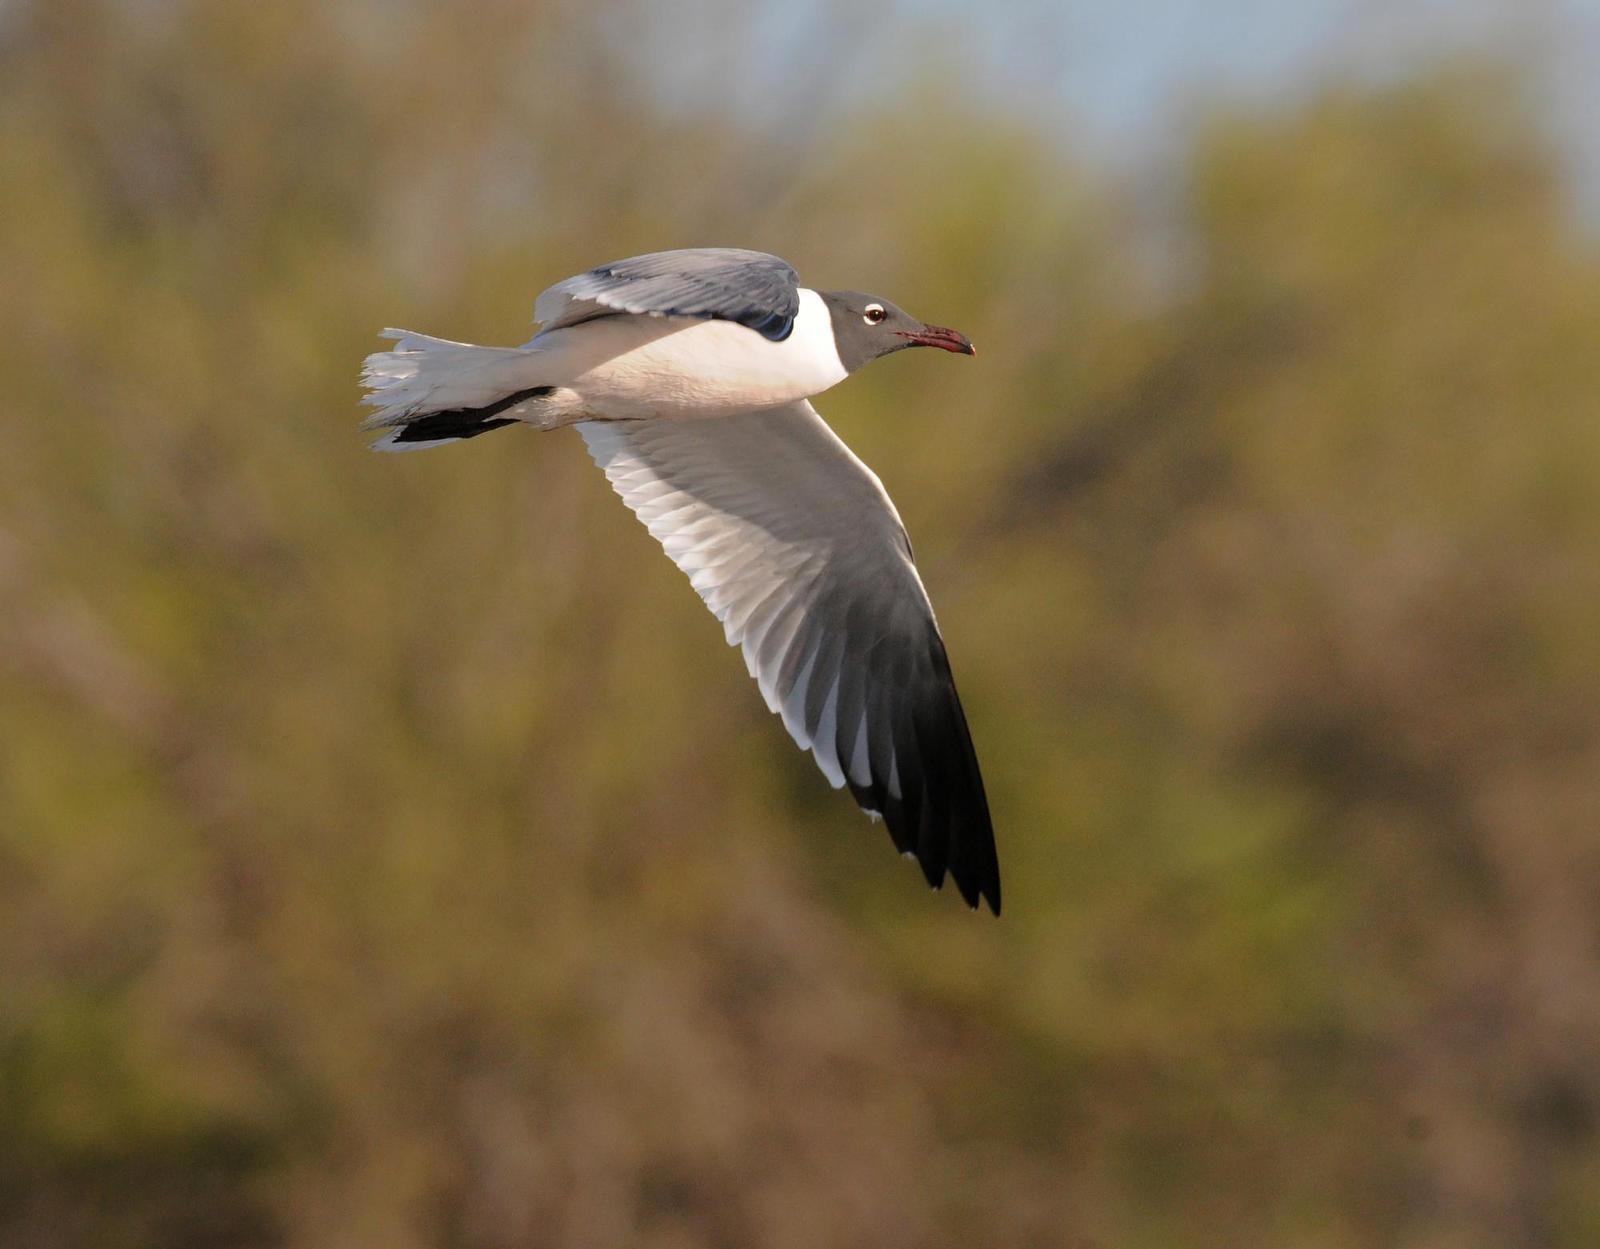 Laughing Gull Photo by Steven Mlodinow